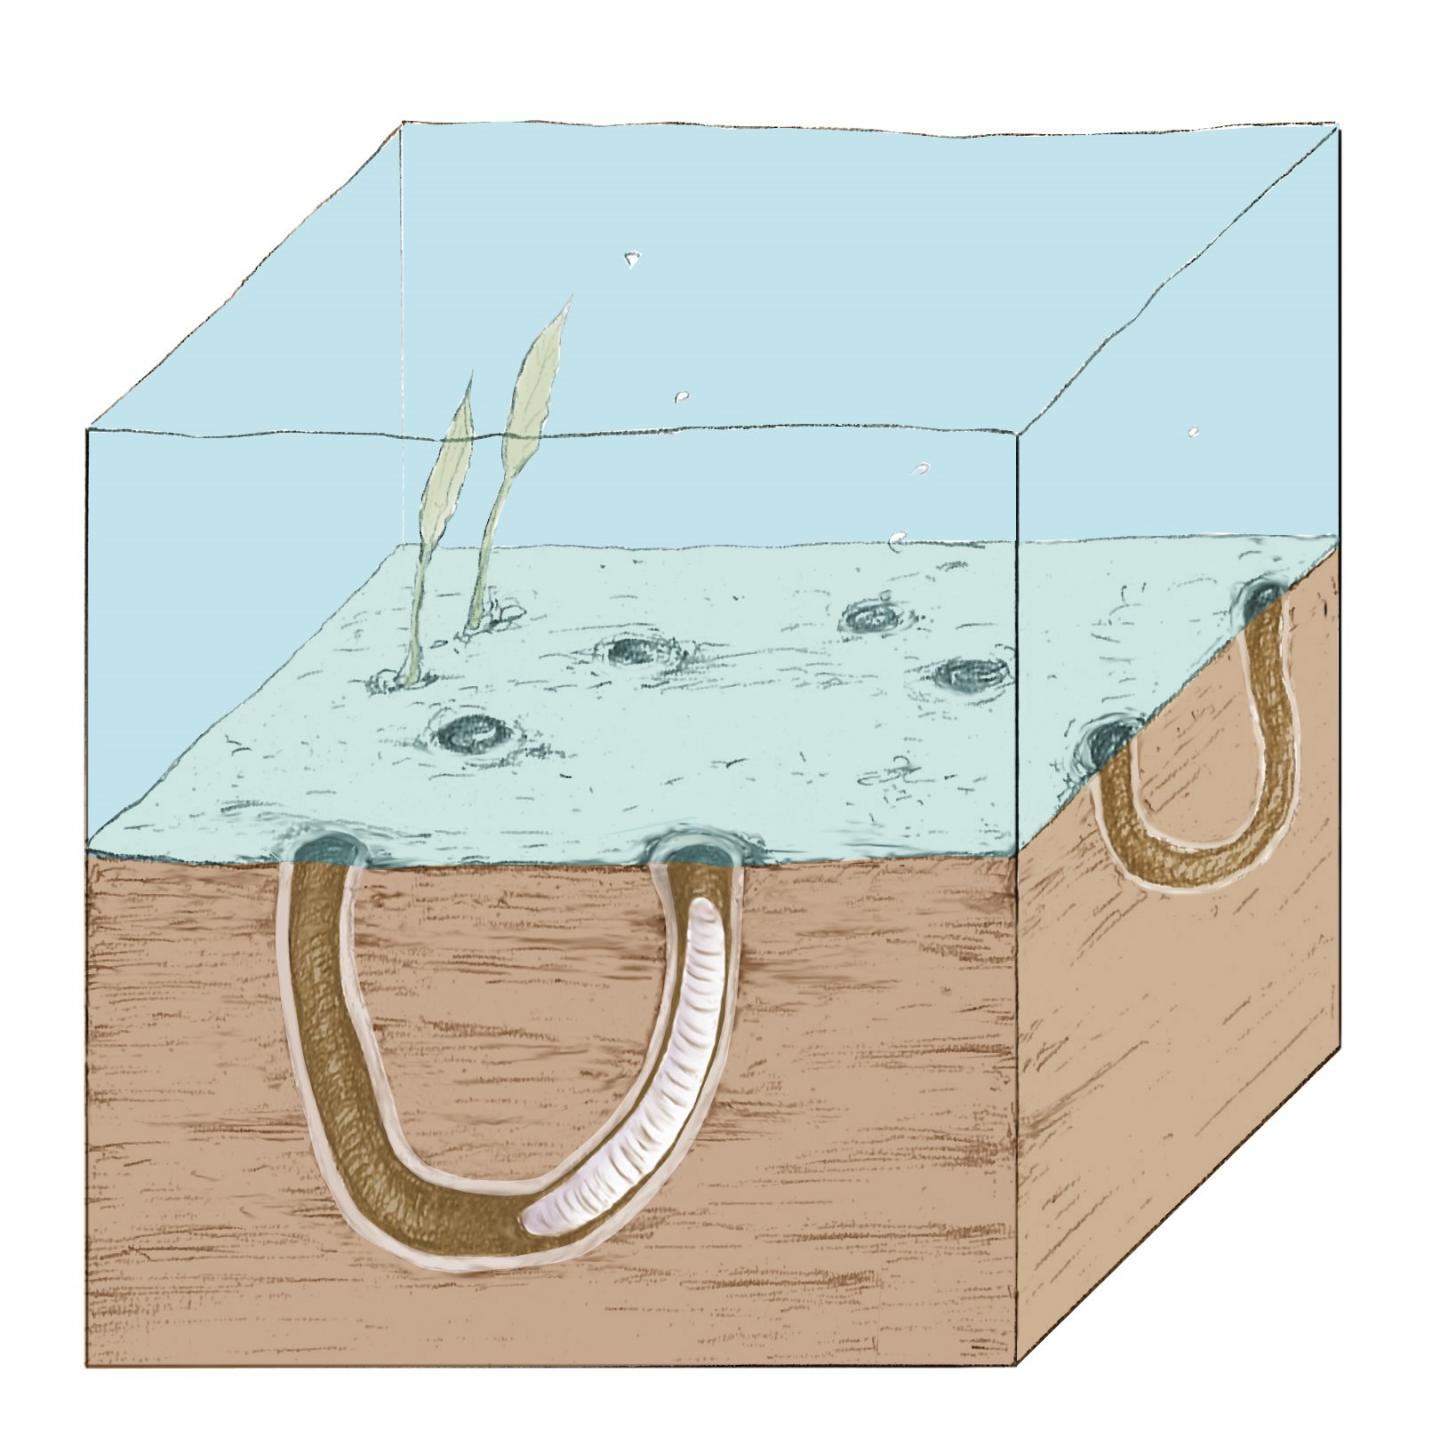 Reconstruction of the Late Ediacaran (ca. 550 Million Years Ago) Sea Floor with Burrows of a Worm-Li